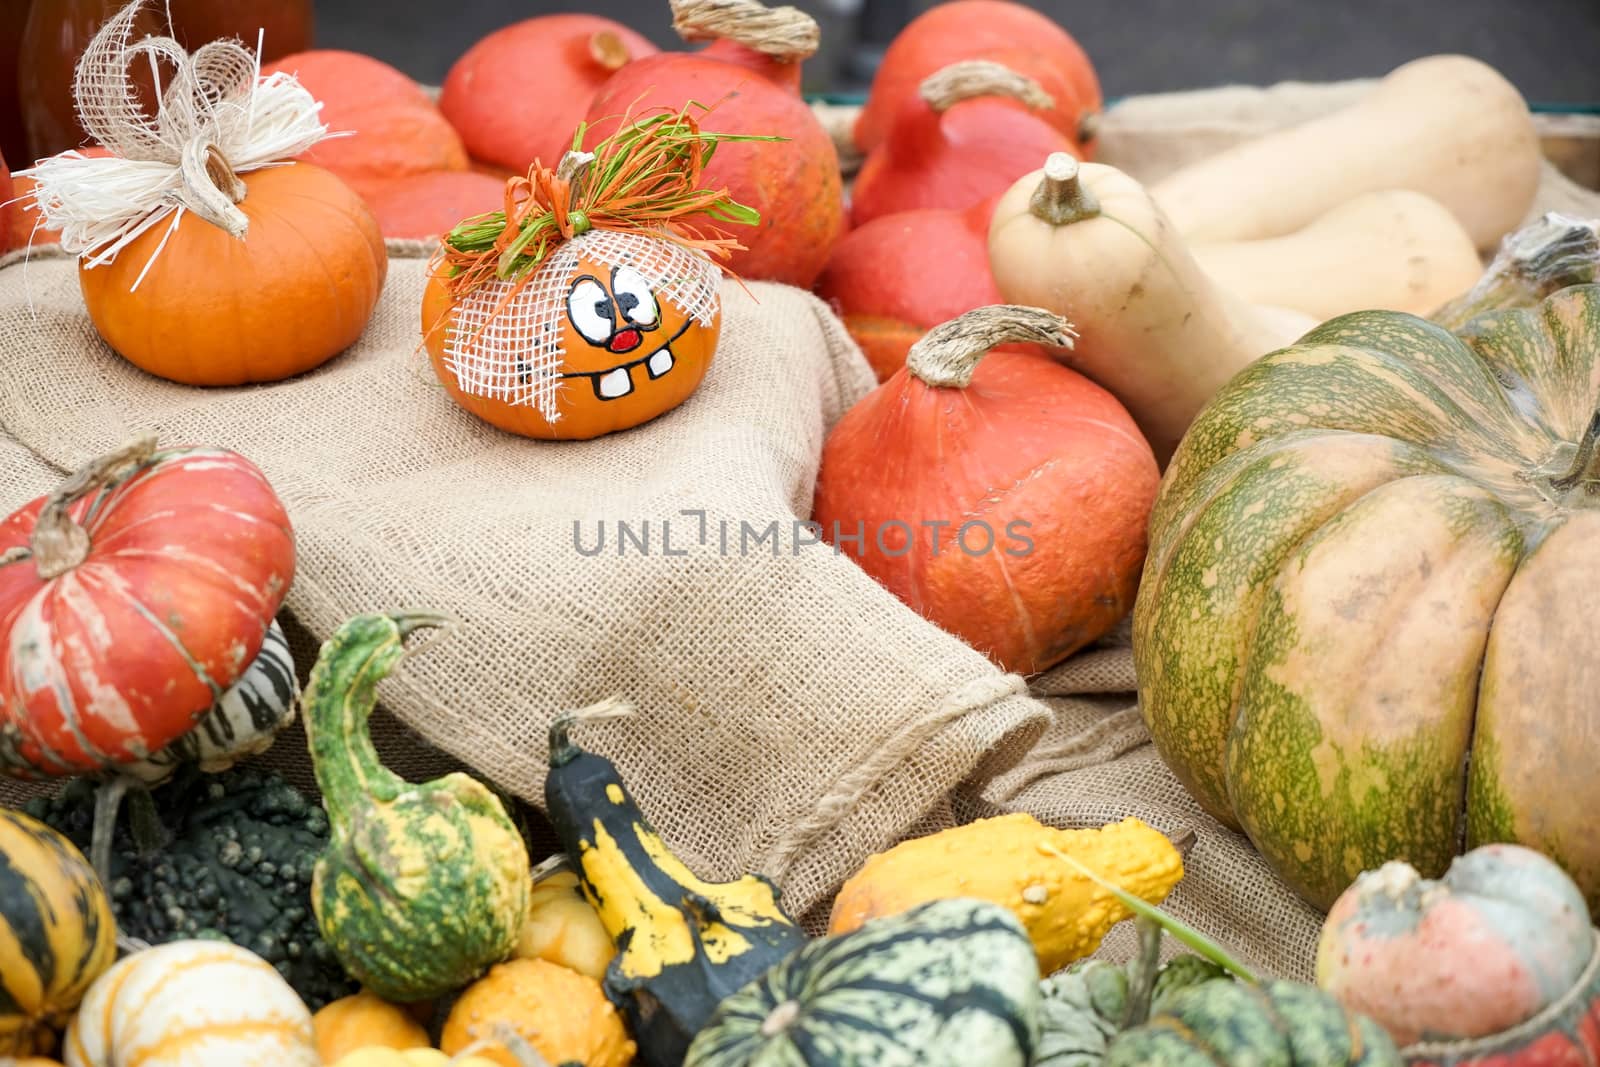 A group of colourful gourds in Friedrichsdorf by phil_bird